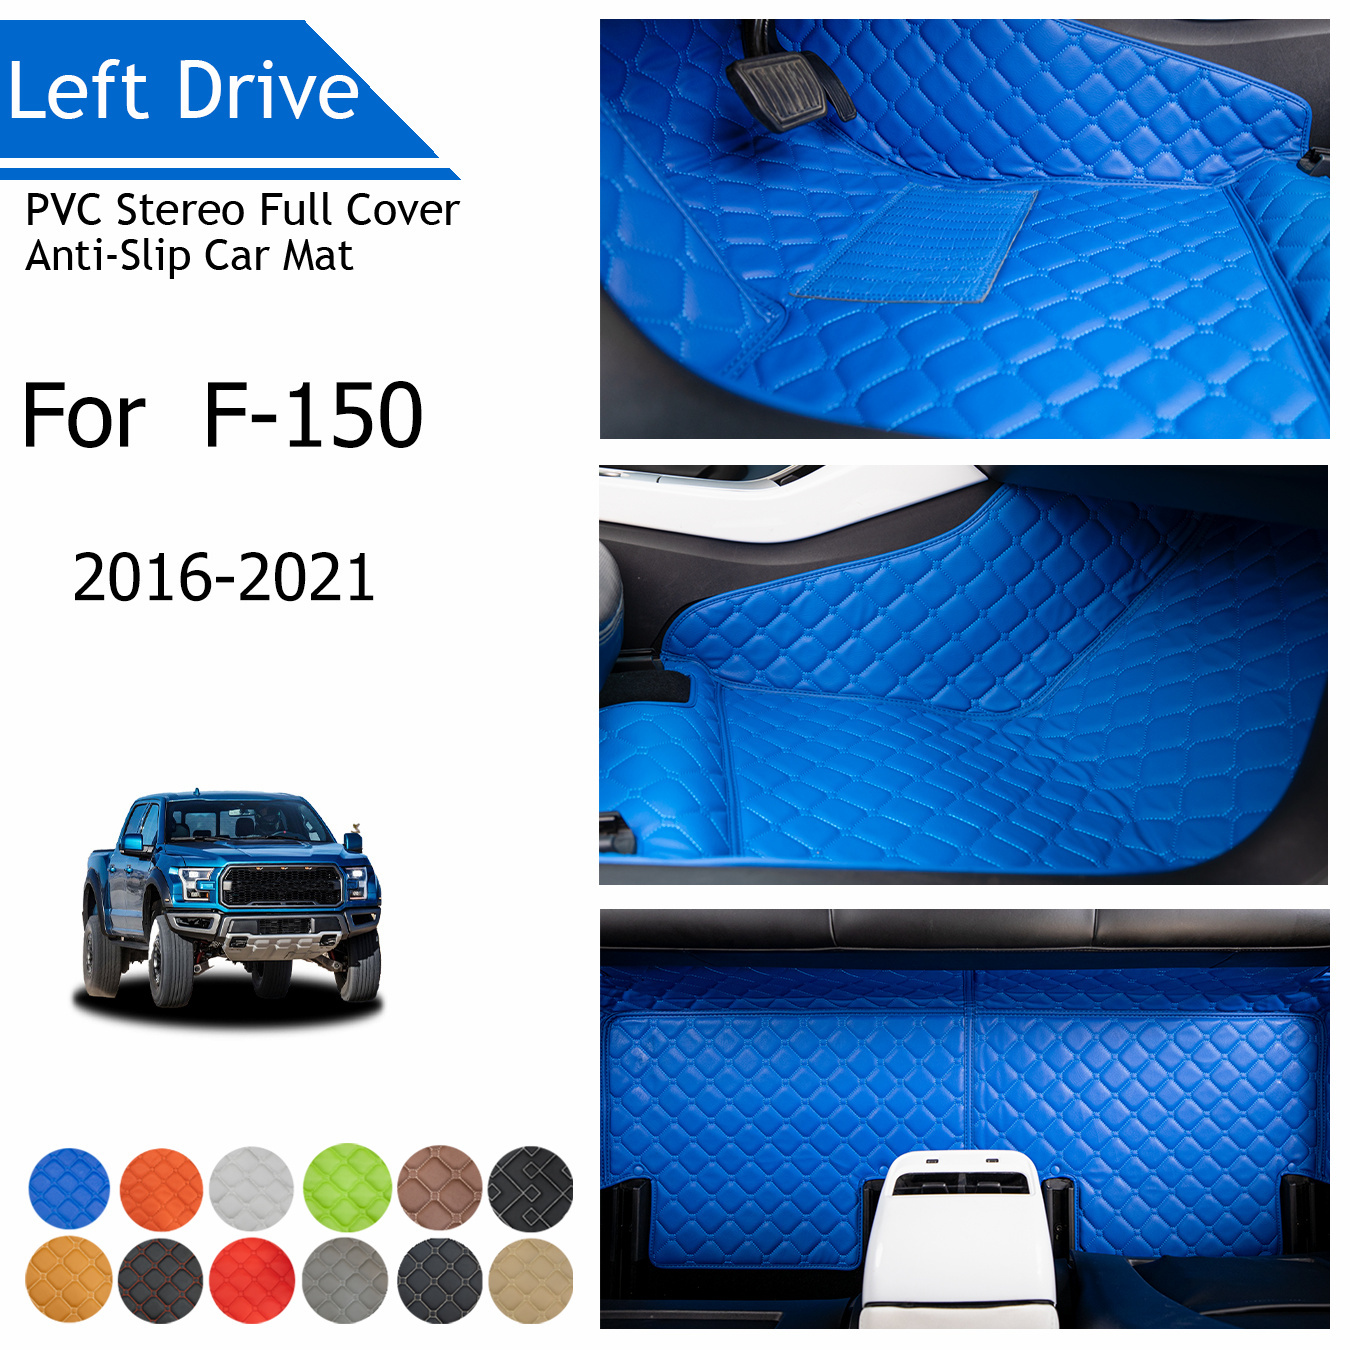 

Tegart [lhd]for Ford For F-150 2016-2021 3 Layers Pvc Stereo Full Cover Anti-slip Car Mats